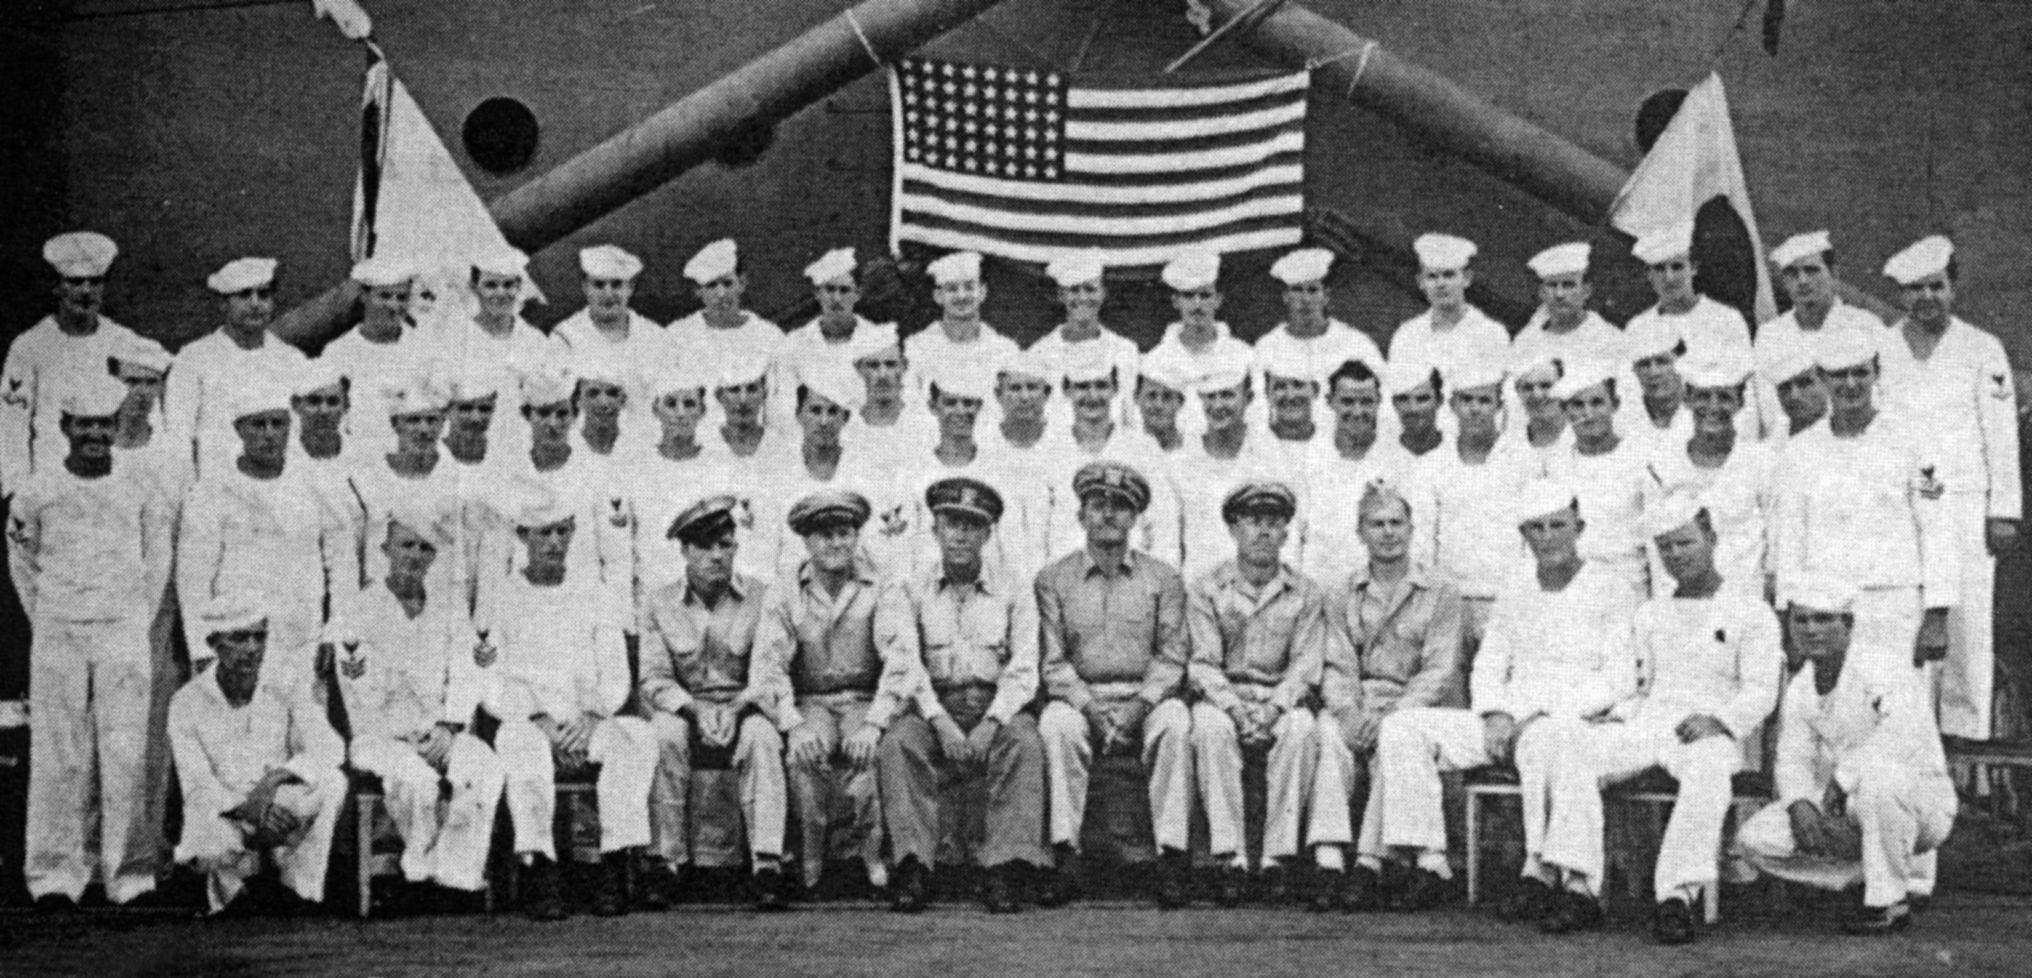 During a quiet period, the crew of the USS Goodhue poses for a portrait. Twenty-one crewmen were killed in action and more than 100 wounded off Okinawa. (Both photos: National Archives)